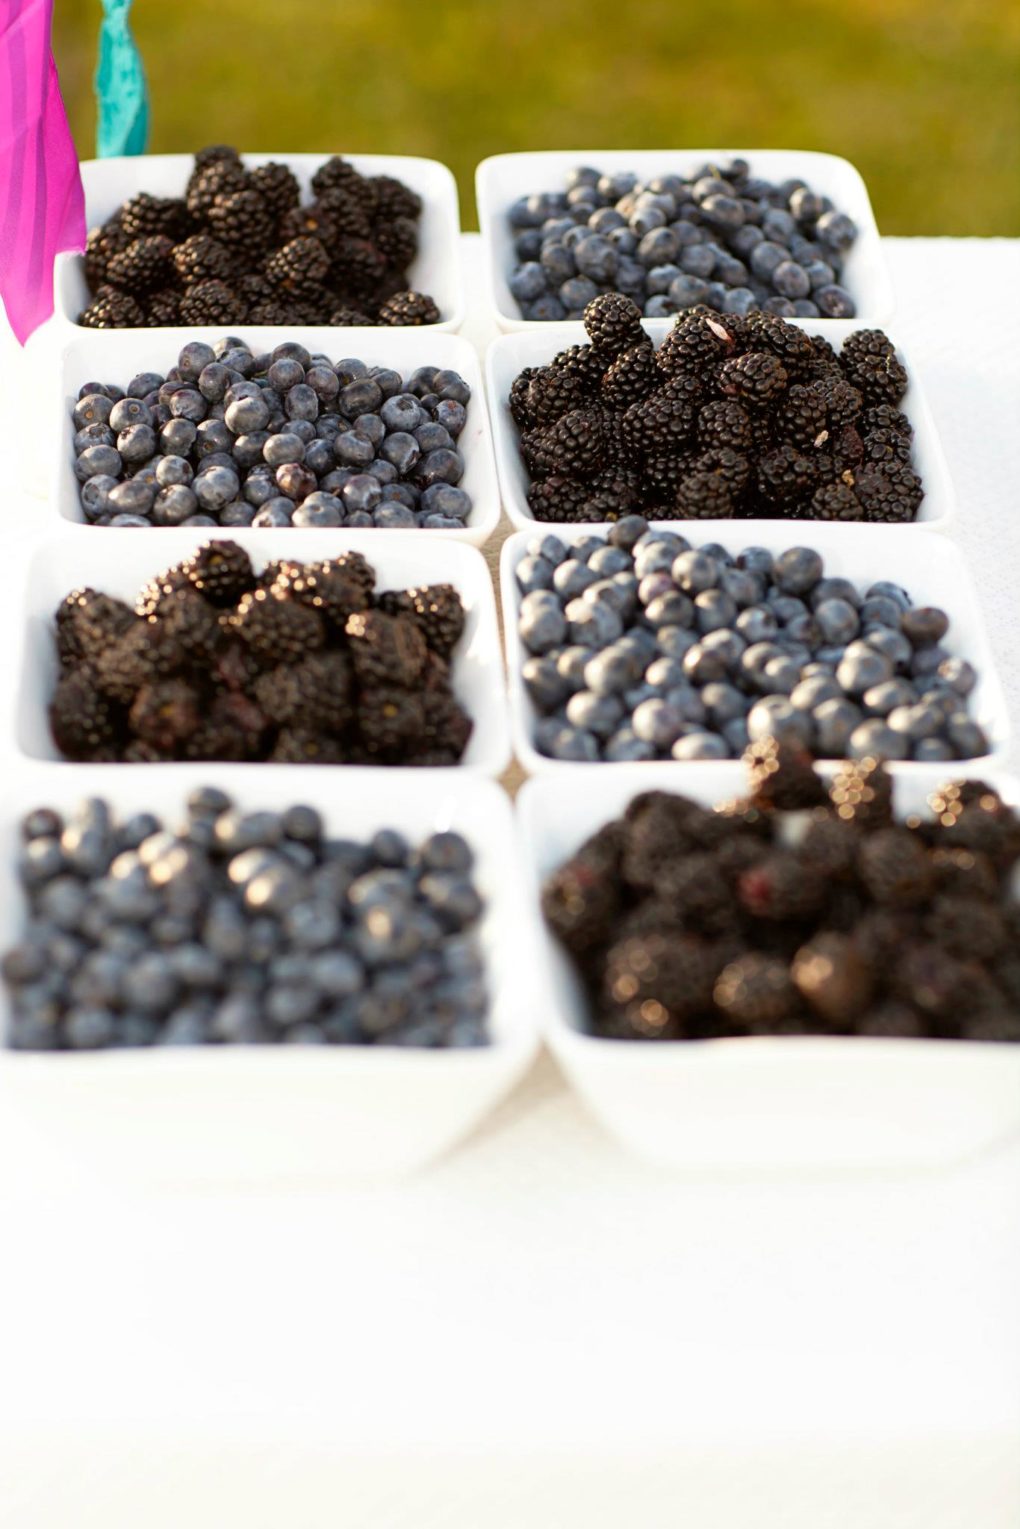 berries for french toast wedding food ideas